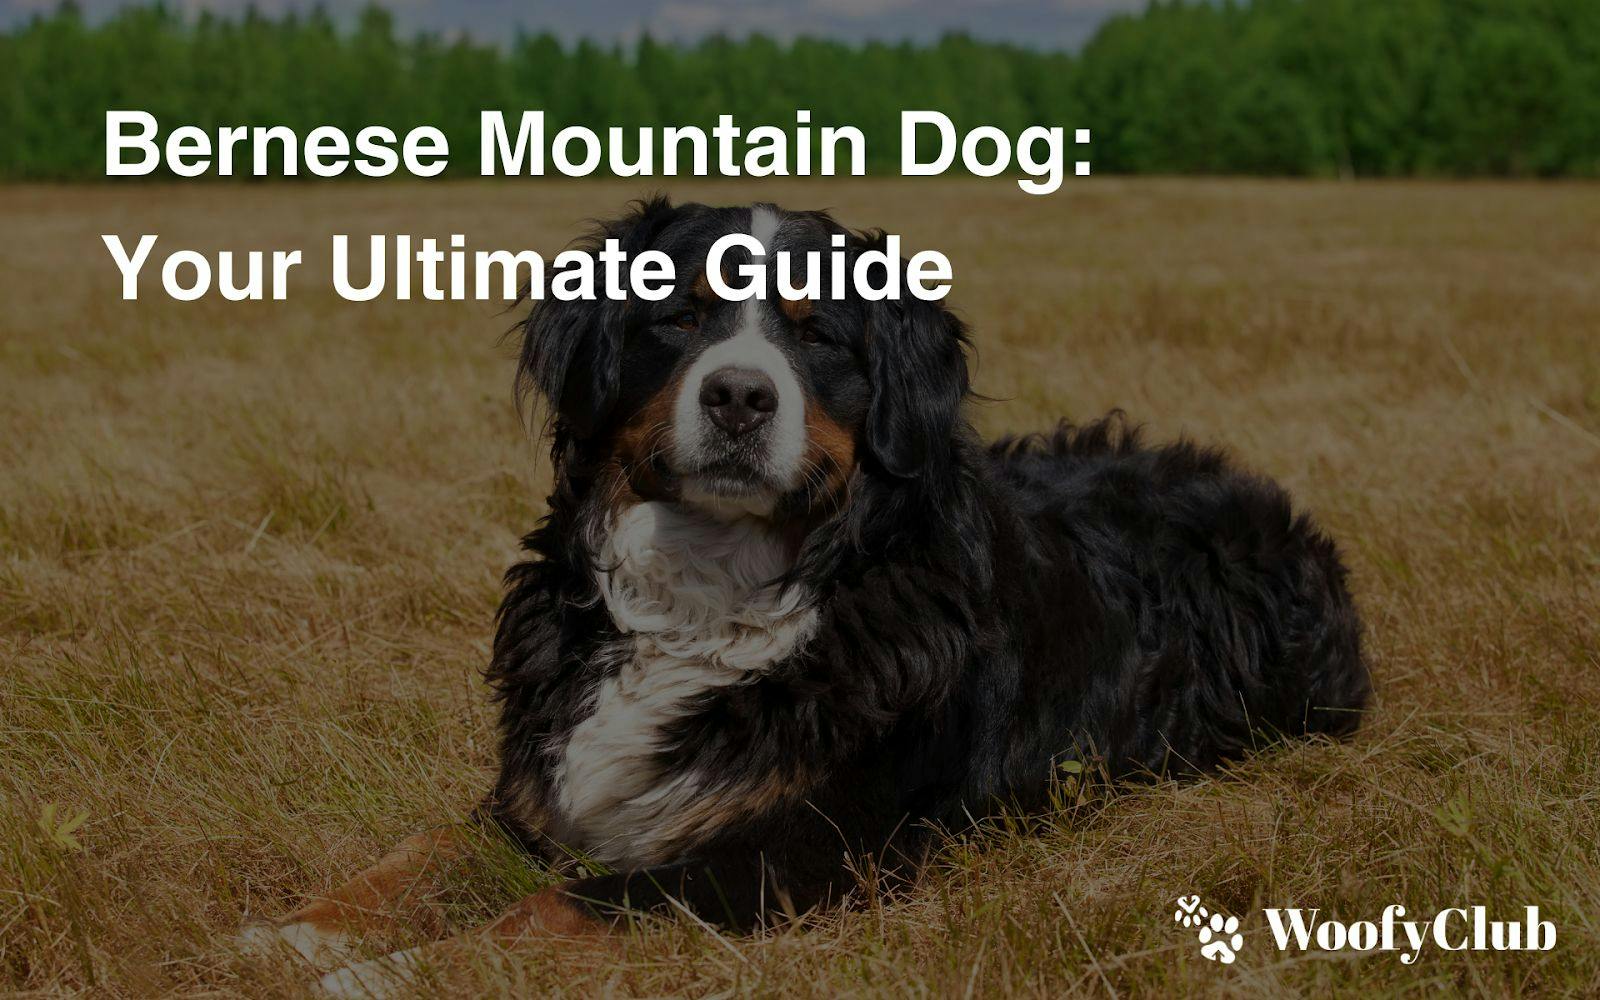 Bernese Mountain Dog: Your Ultimate Guide